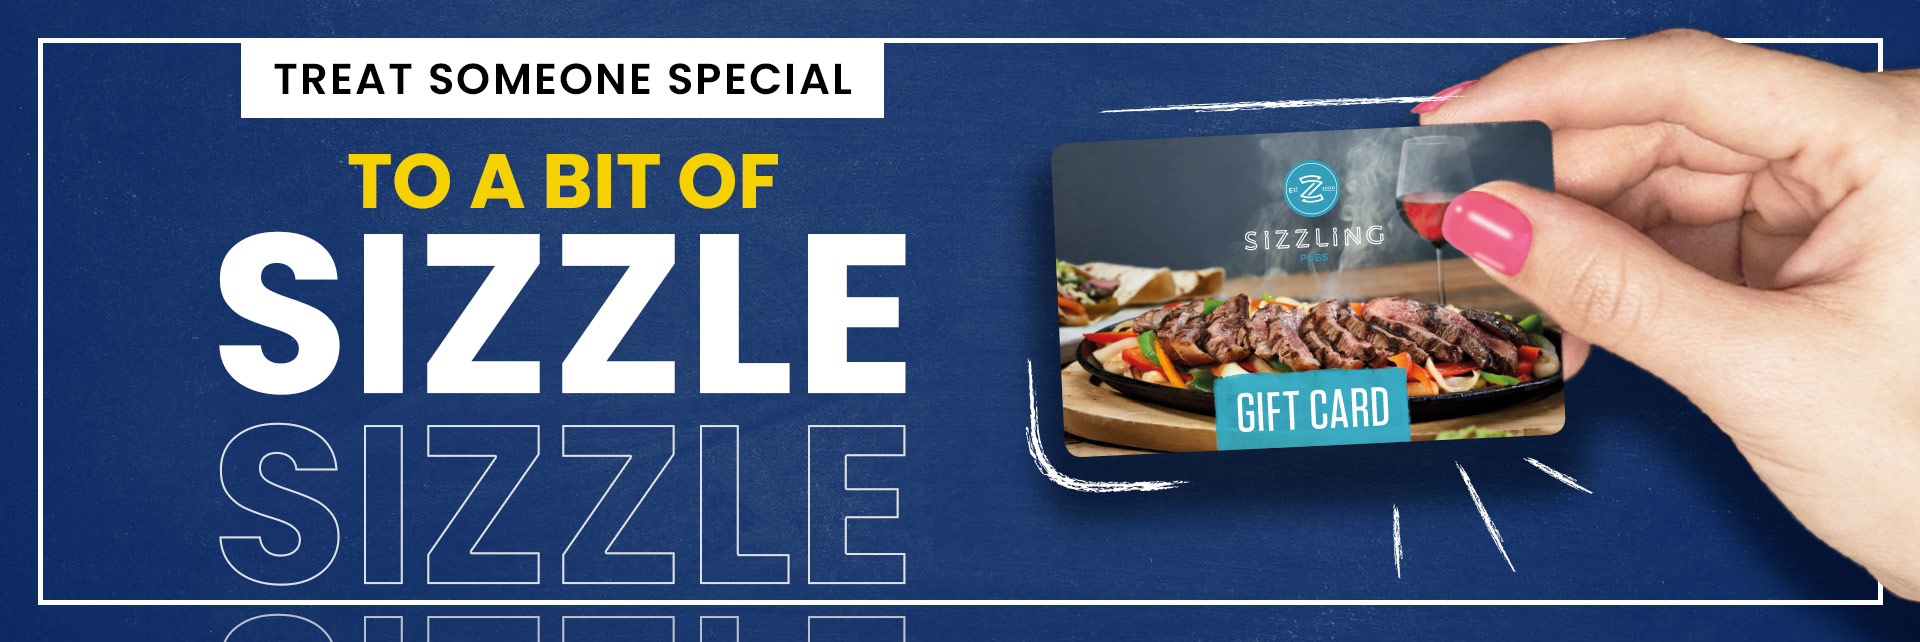 Sizzling Pubs Gift Card at The Lamb Inn in Bristol